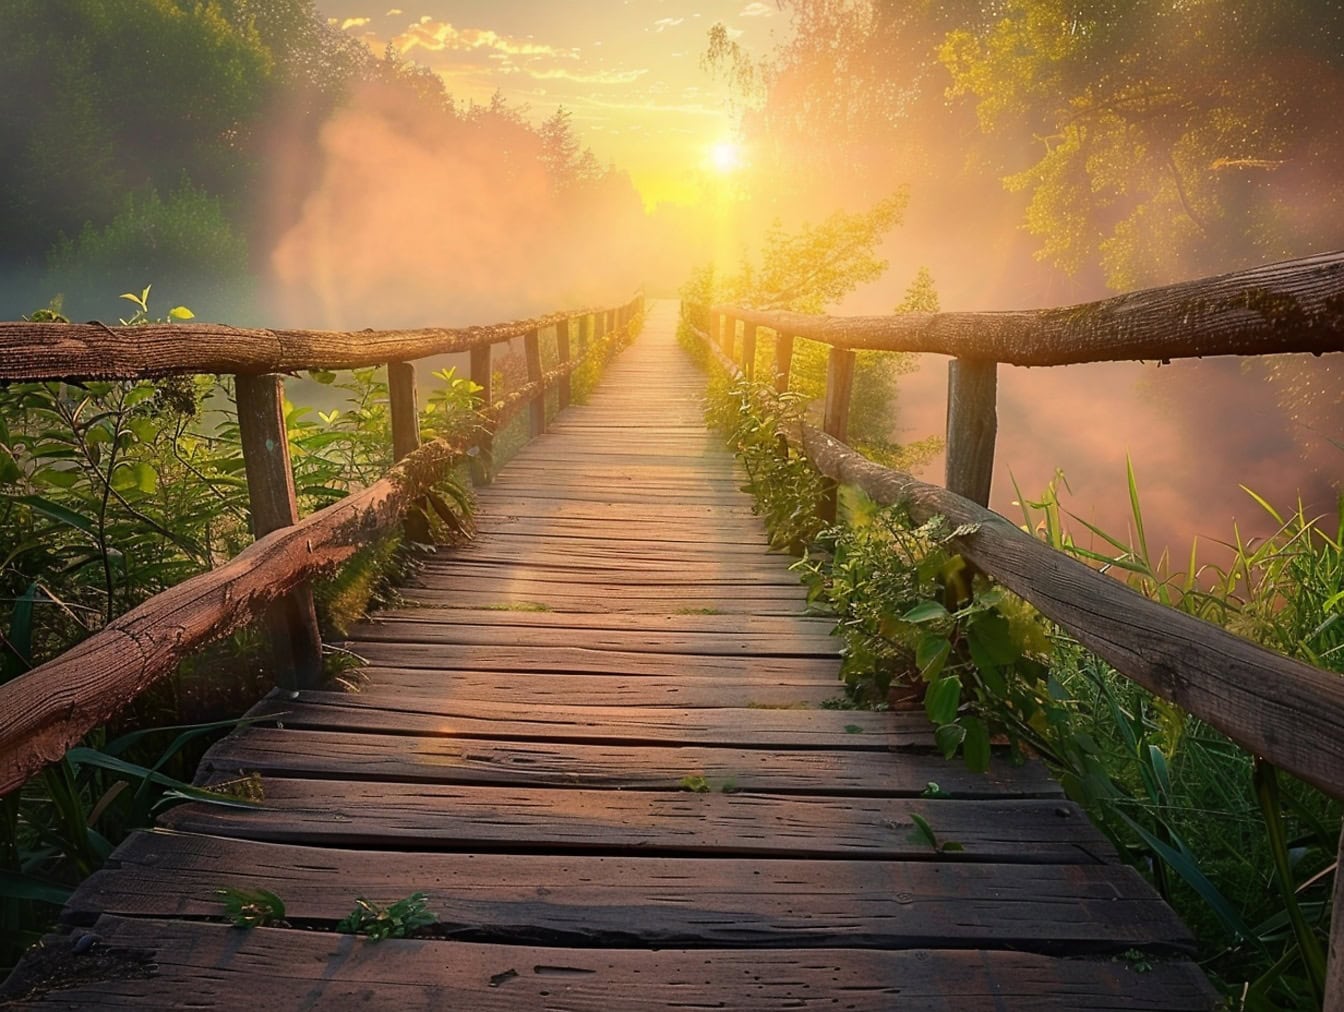 Wooden bridge in wilderness with foggy trees in the background at the sunset